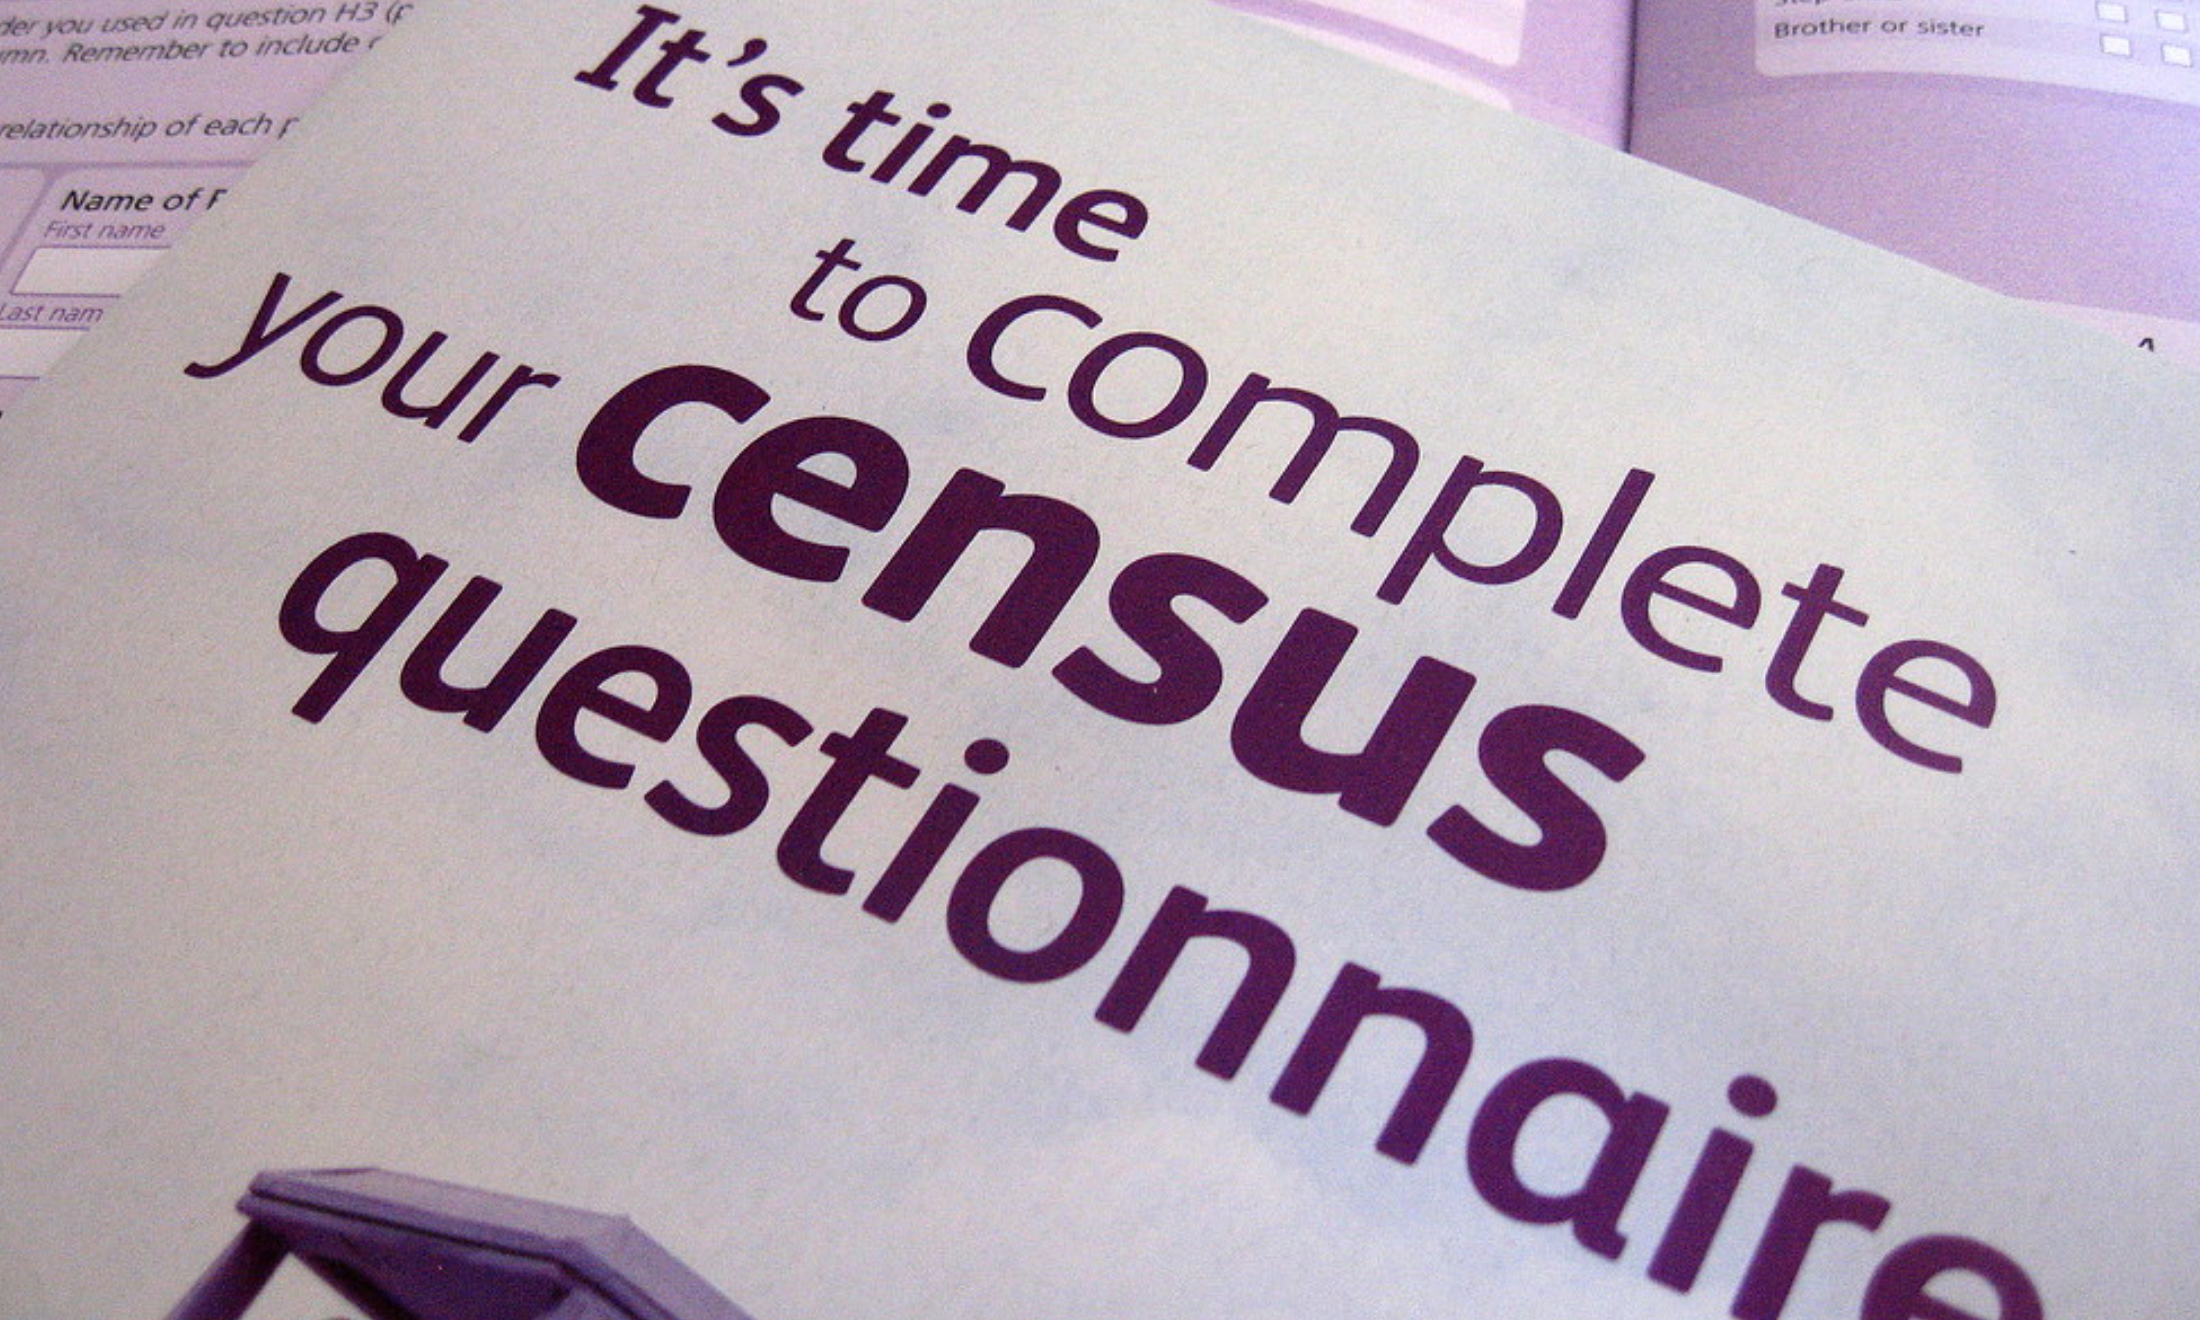 Census 2021: Why Western data collection is causing an Egyptian identity crisis